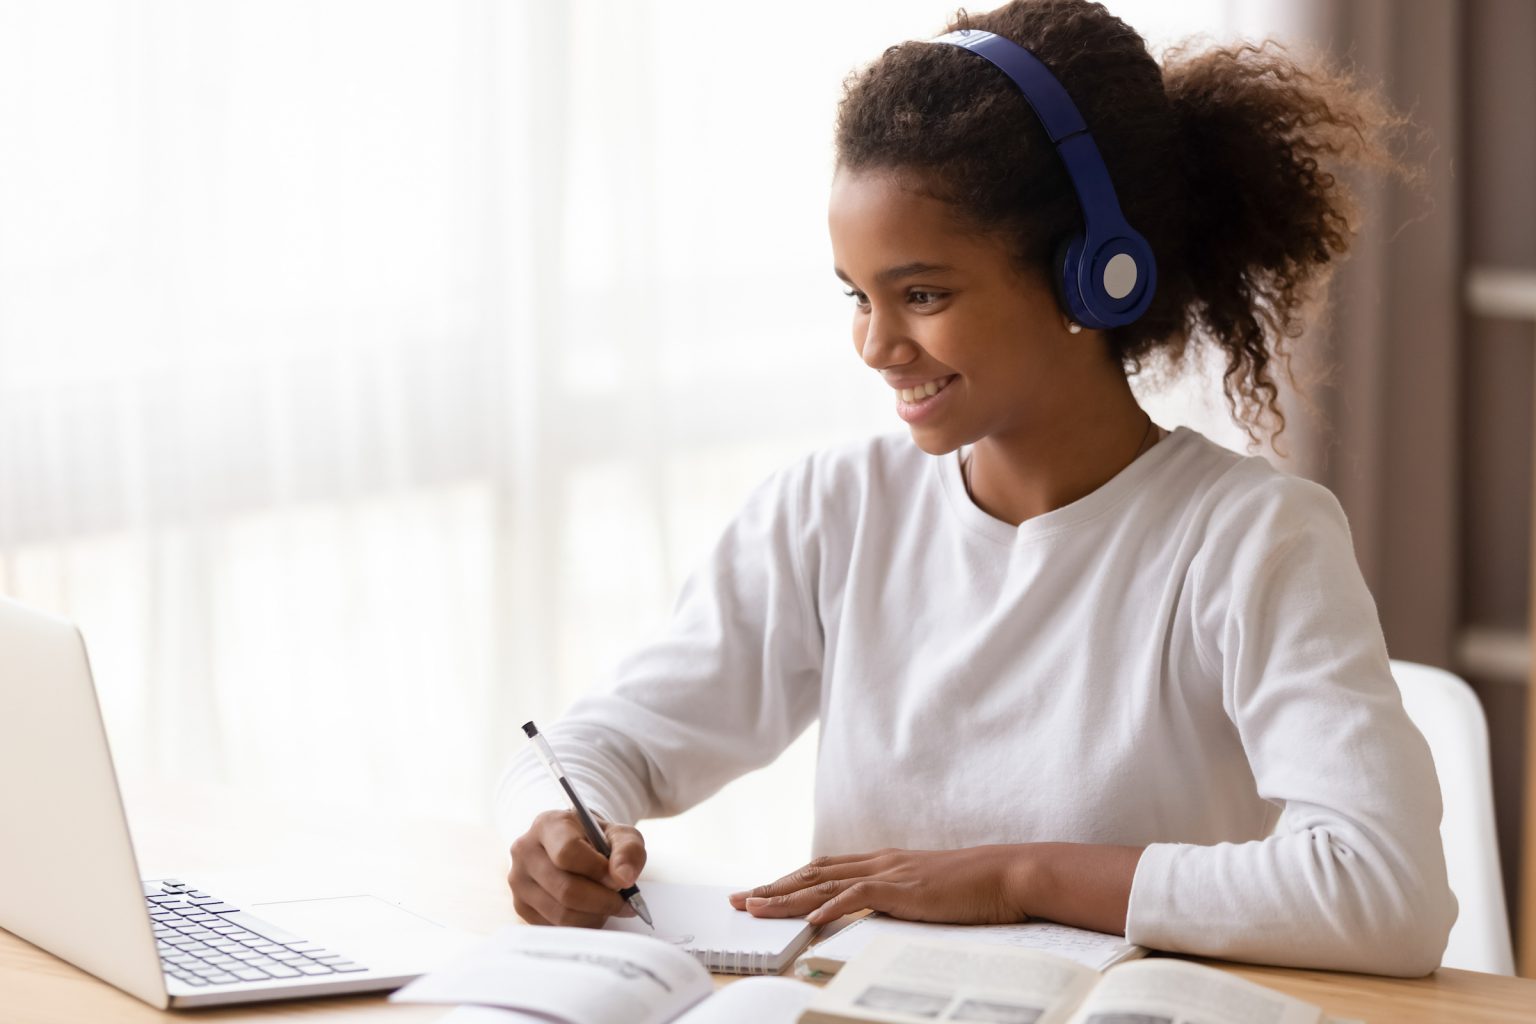 Happy african schoolgirl doing homework sitting at desk, teen girl feels glad studying online e-learning use internet wear headphones writing noting. Education and knowledge modern technology concept